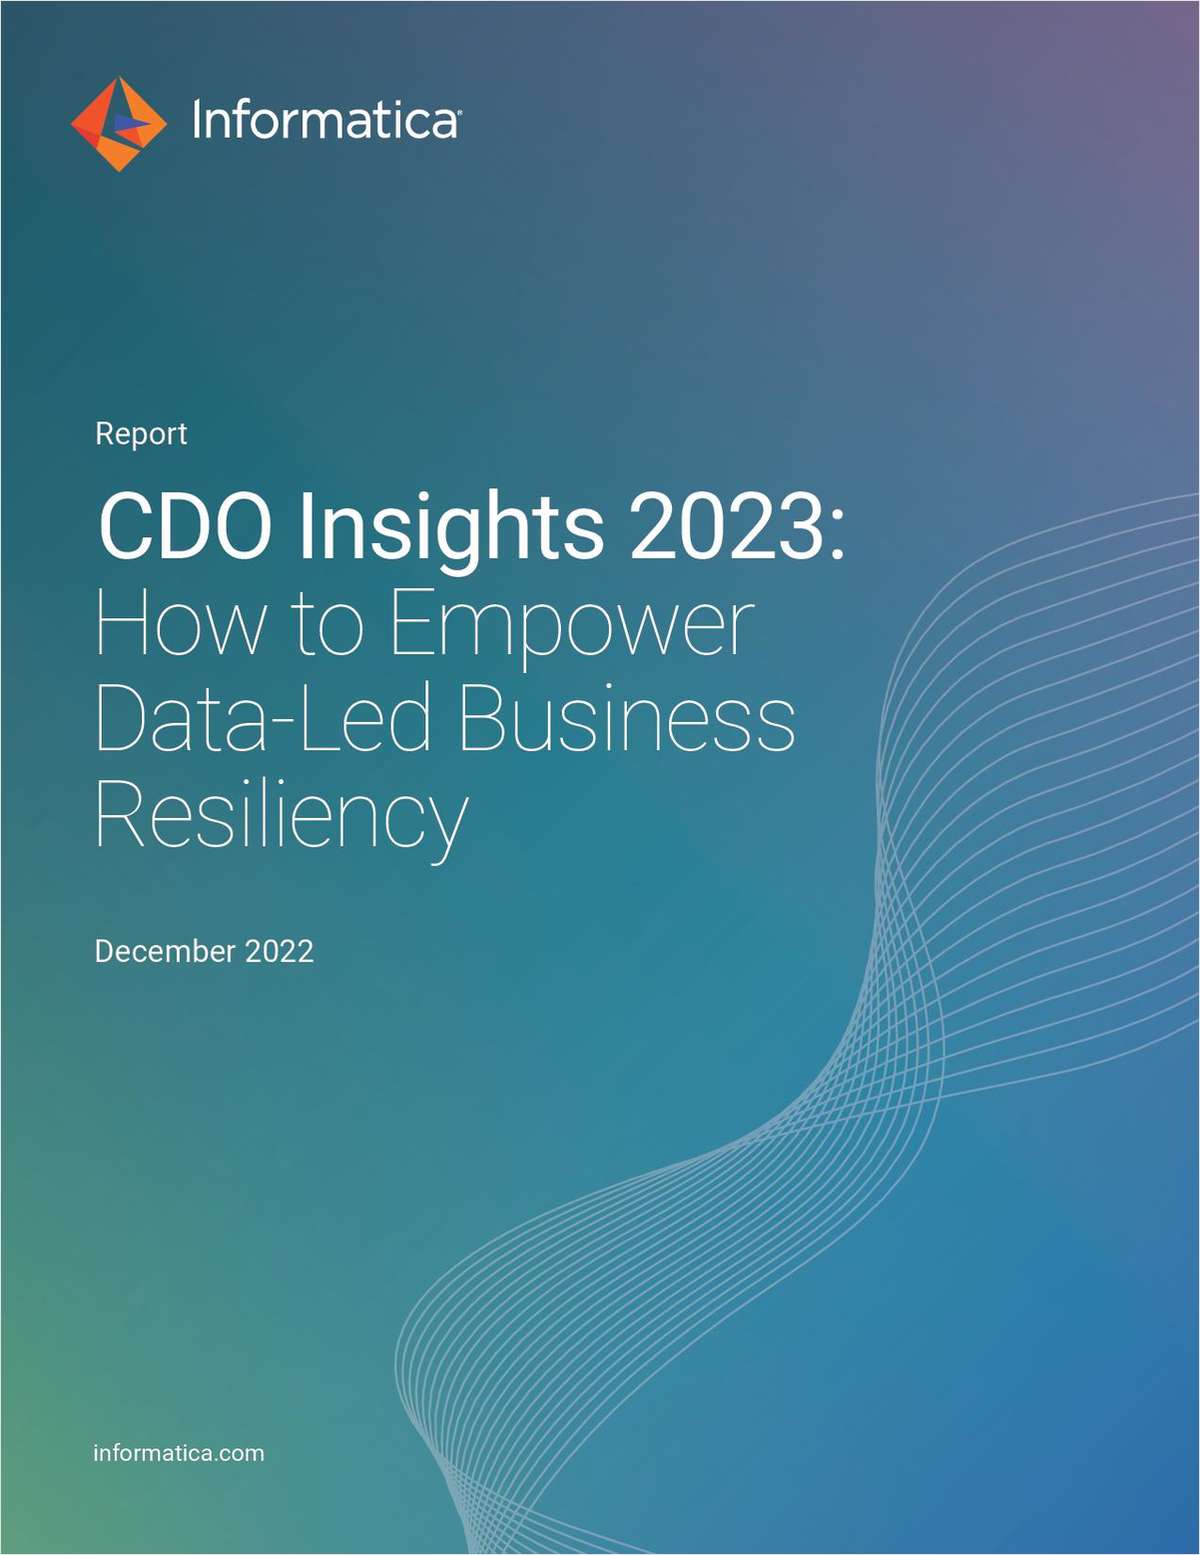 Data Management and Data Governance: Top CDO Data Strategy Priorities in 2023